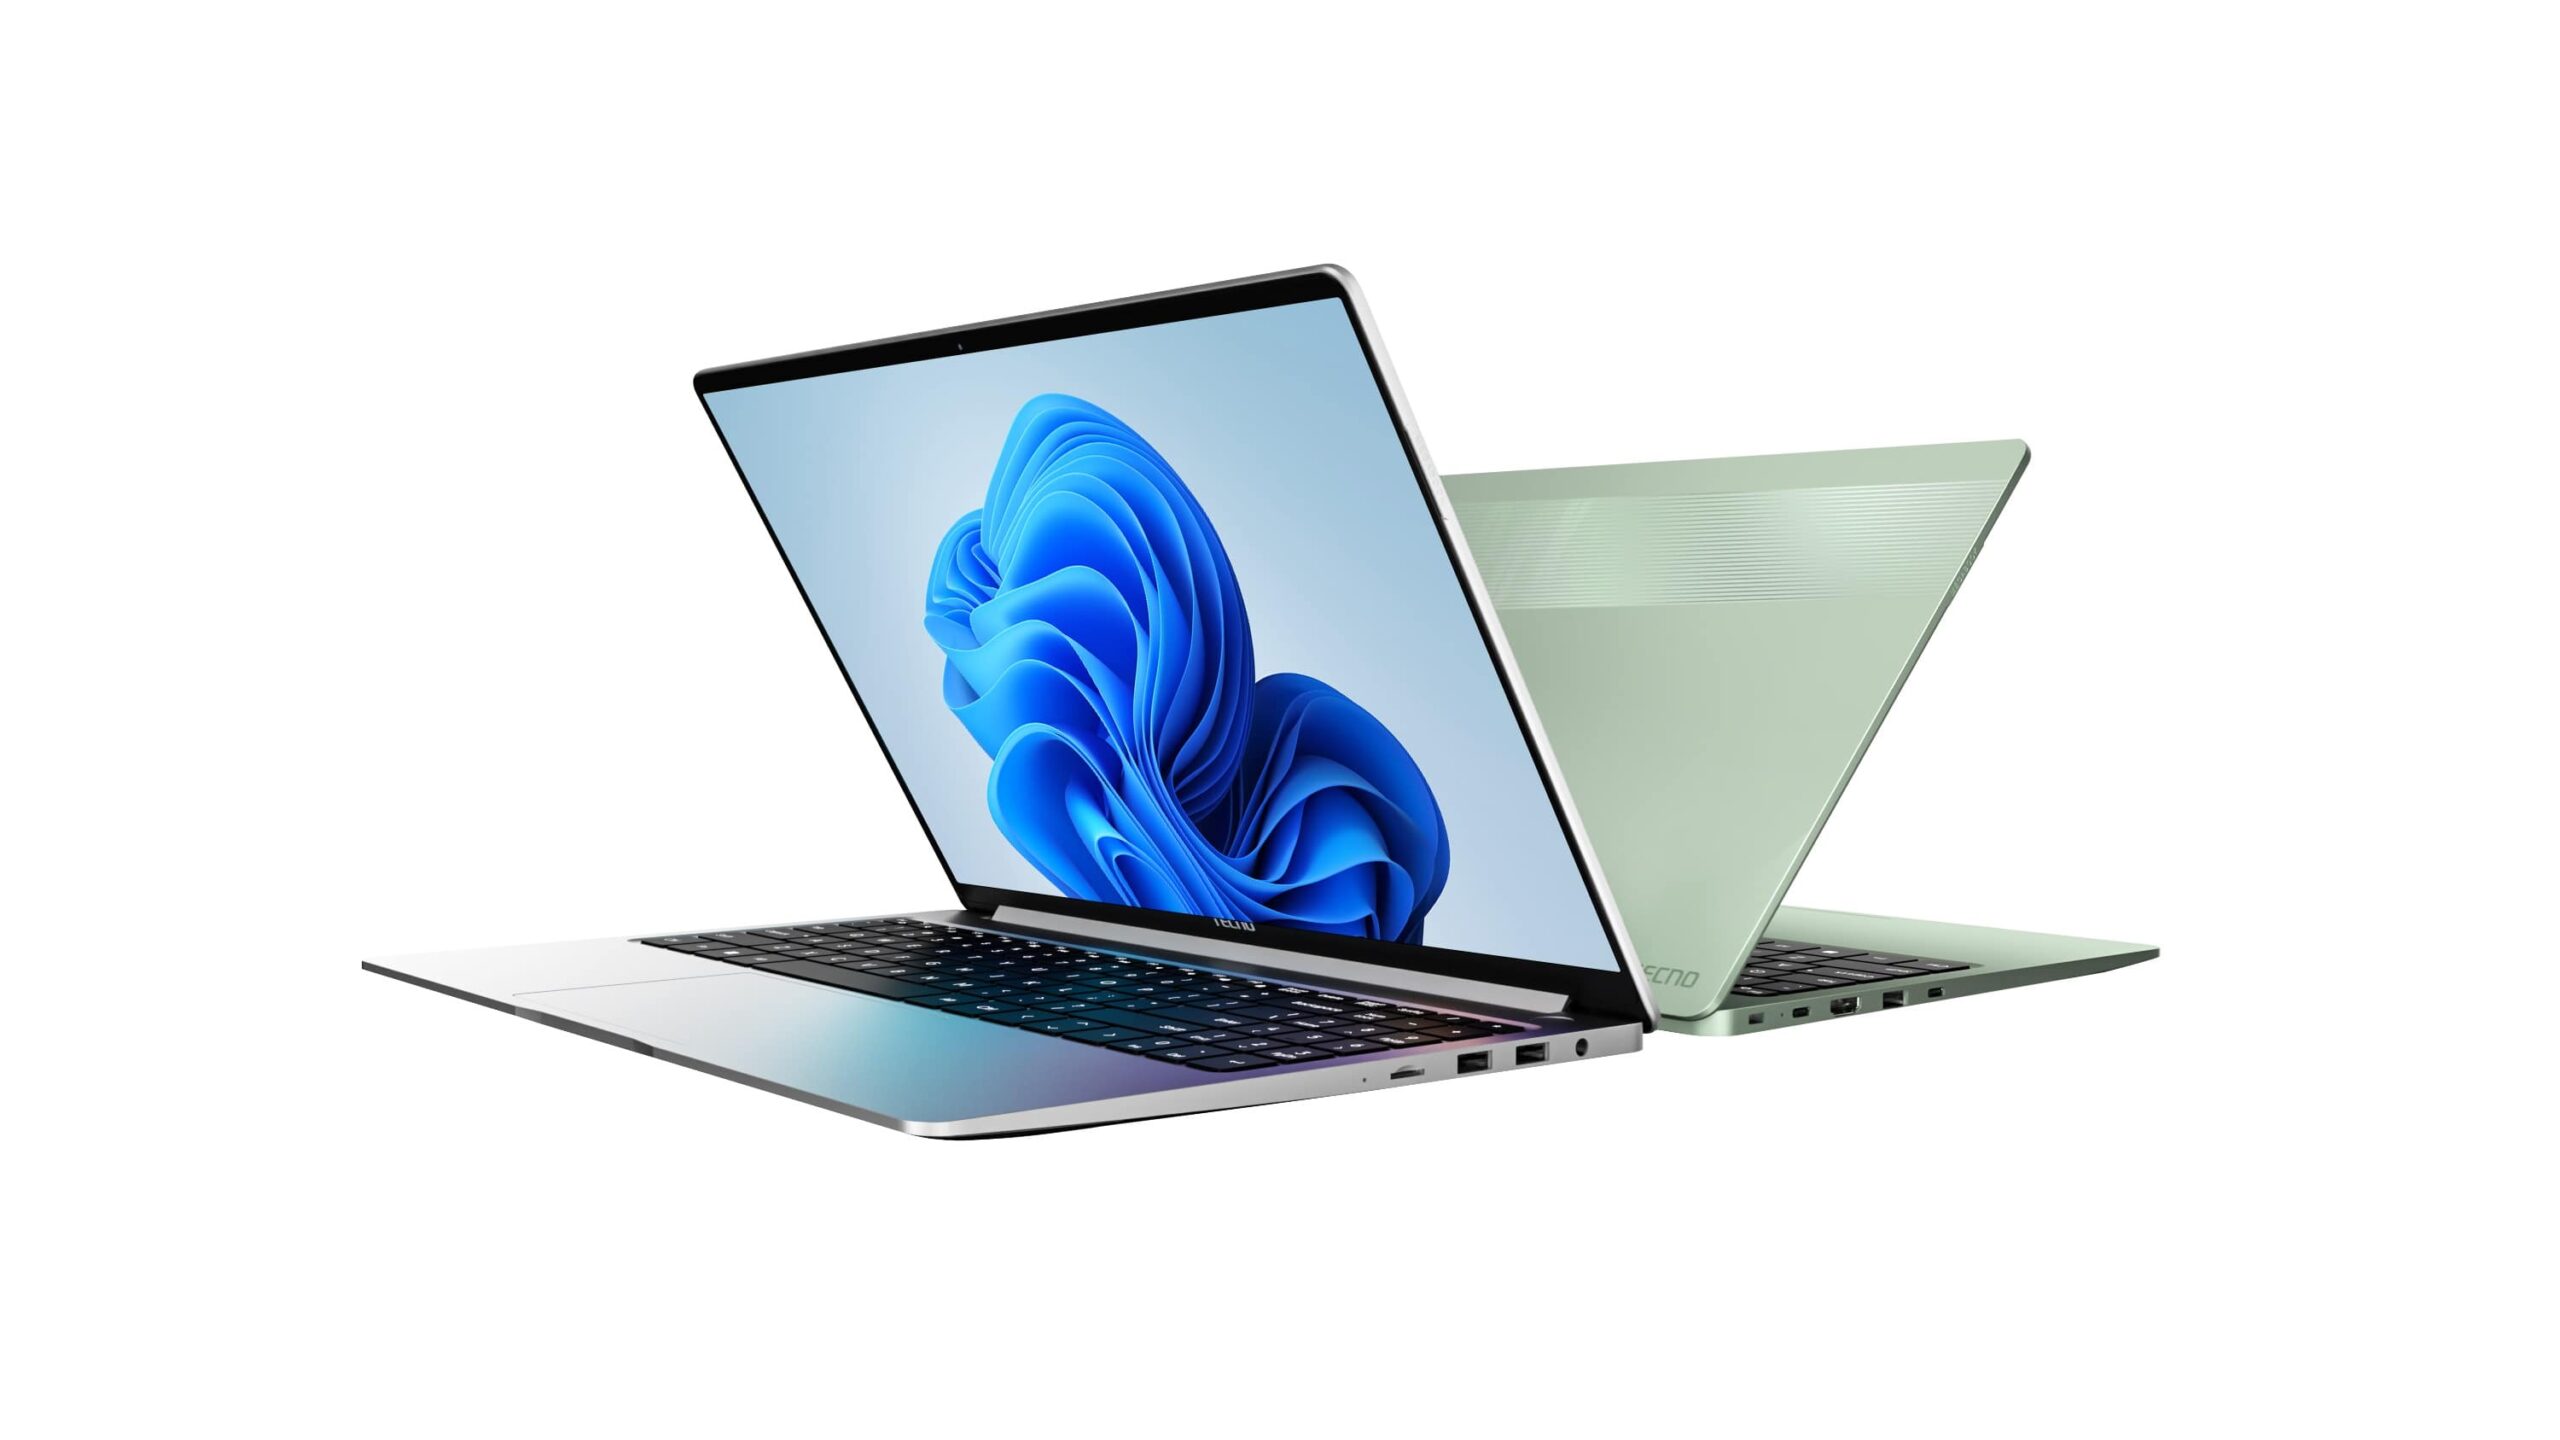 TECNO Launches MEGABOOK T1 Laptop Series, Fusion of Power & Elegance Latest Laptop Launched in India- techinfoBiT